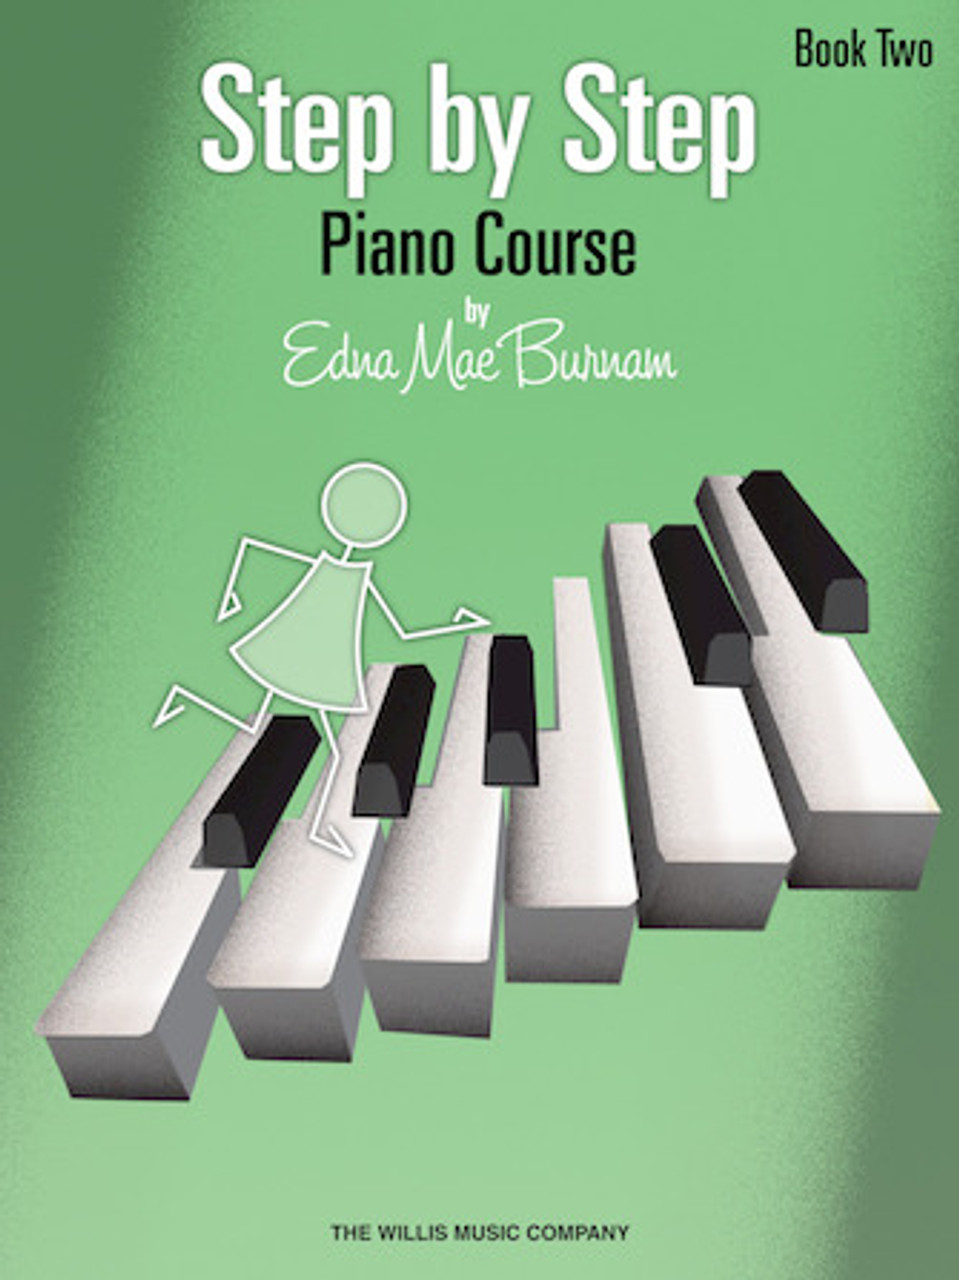 Step by Step Piano Course by Edna Mae Burnam- Book 2